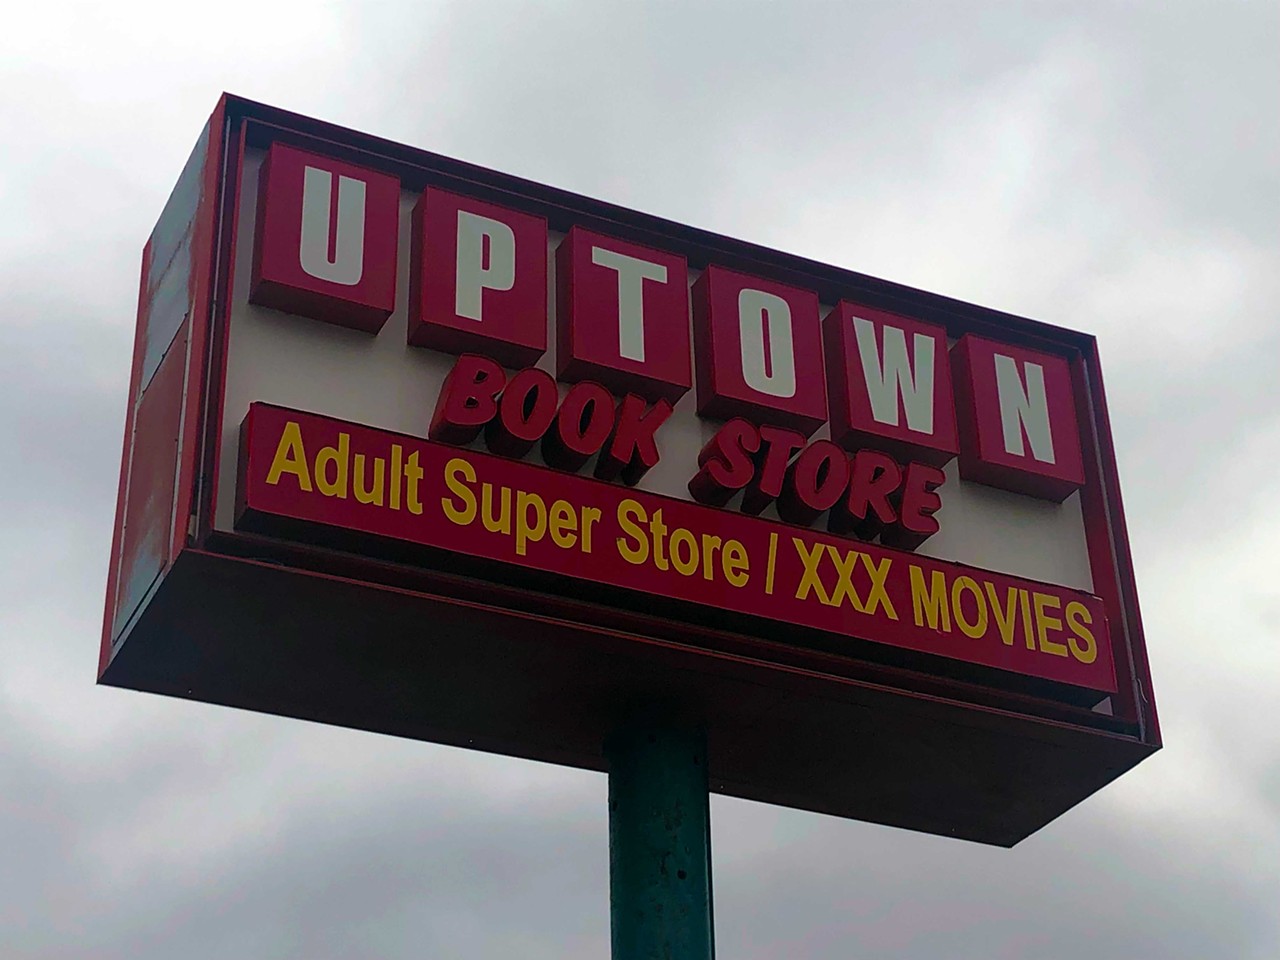 
Best Adult Video Store: Uptown Video
16401 Eight Mile Rd., Detroit; 313-836-0647